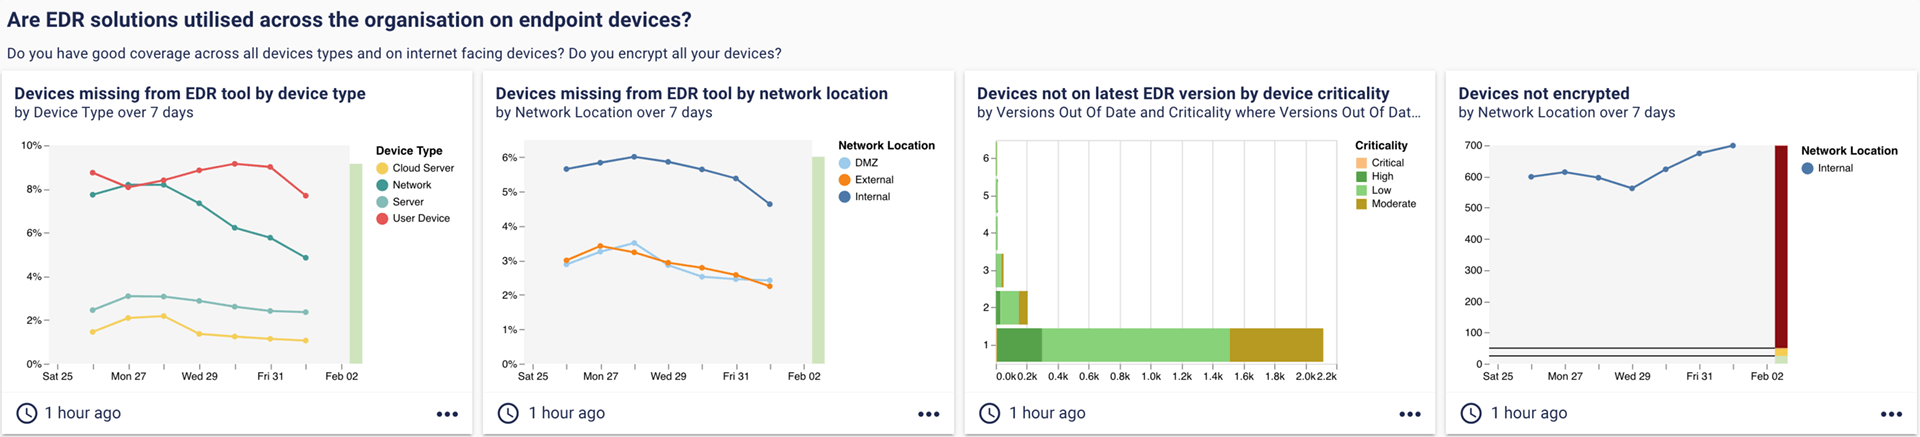 Dashboard: Are EDR solutions used across all endpoint devices